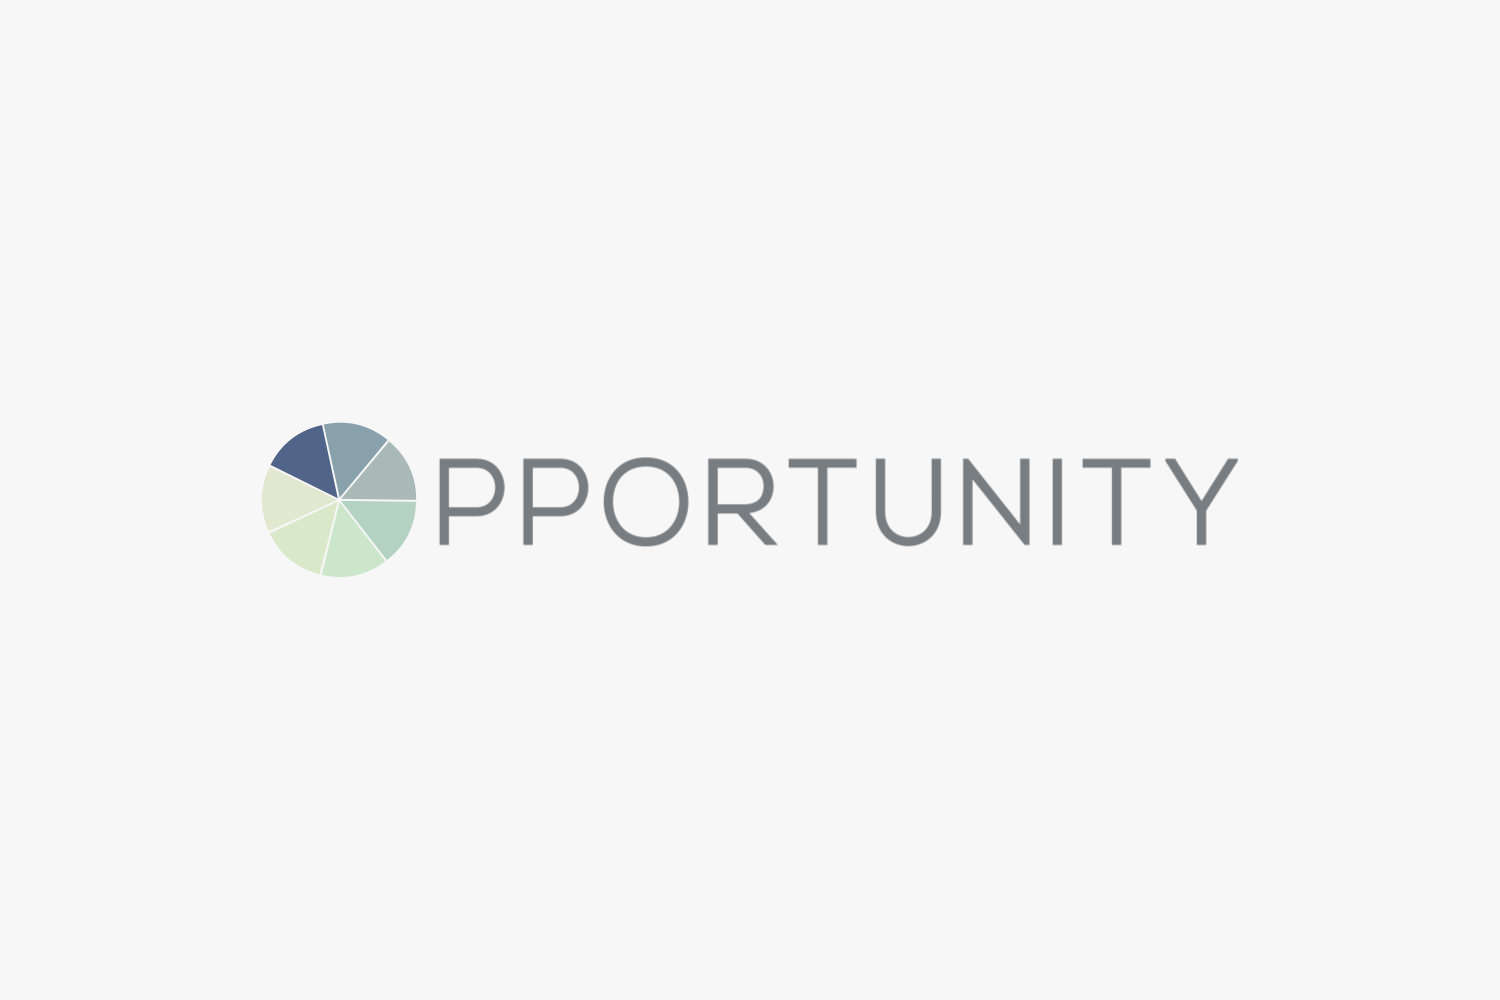 Opportunity Wheel Animation | The Greenlining Institute